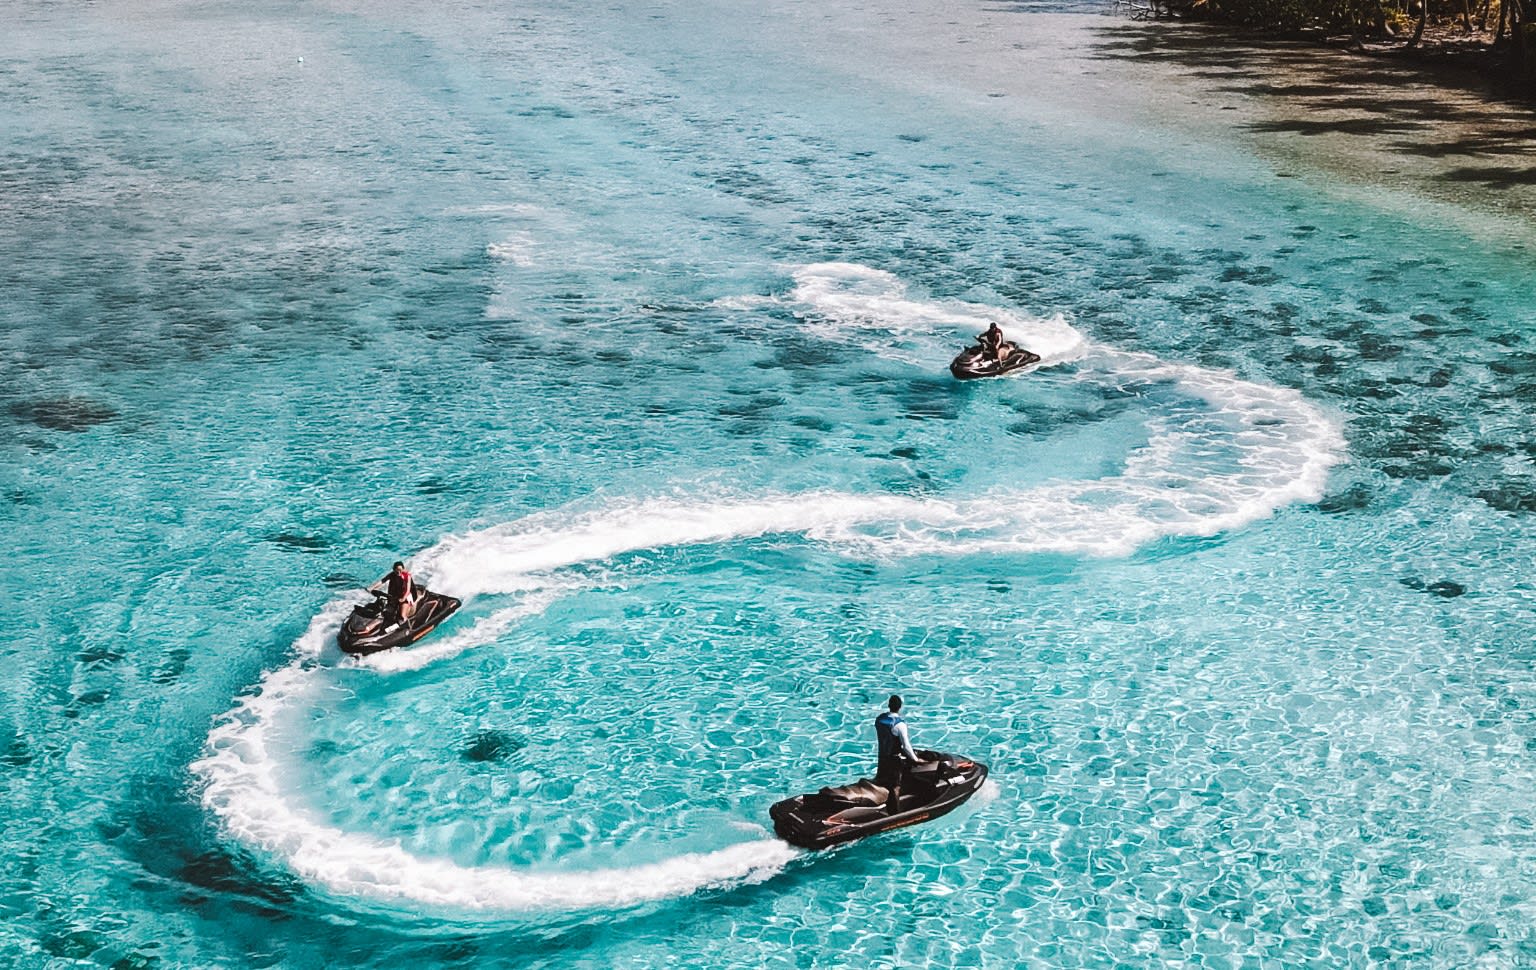 Jet skiing for beginners: All you need to know!